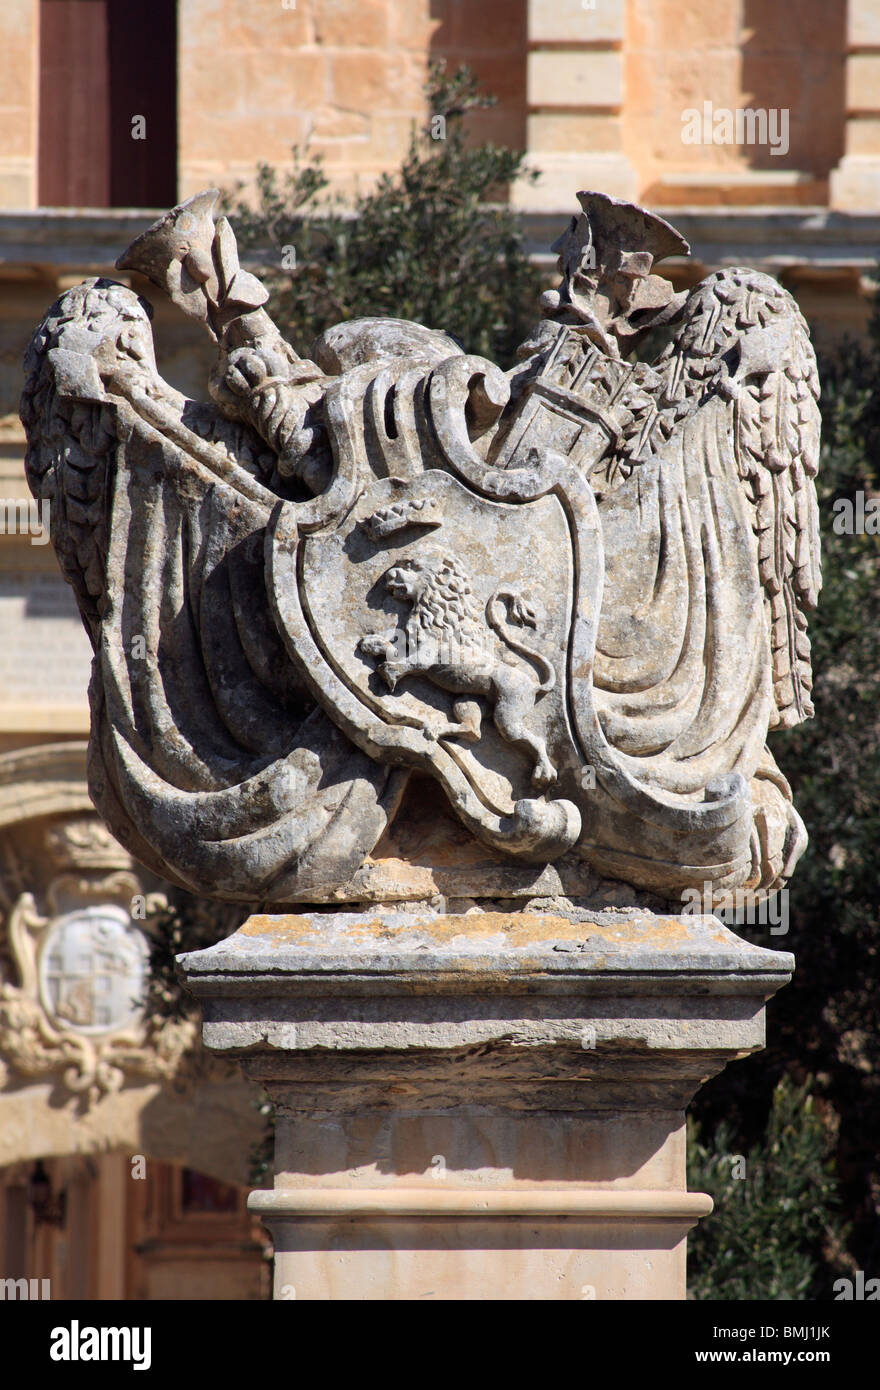 Mdina, Malta. The arms and crest showing a lion and crown on a shield ...